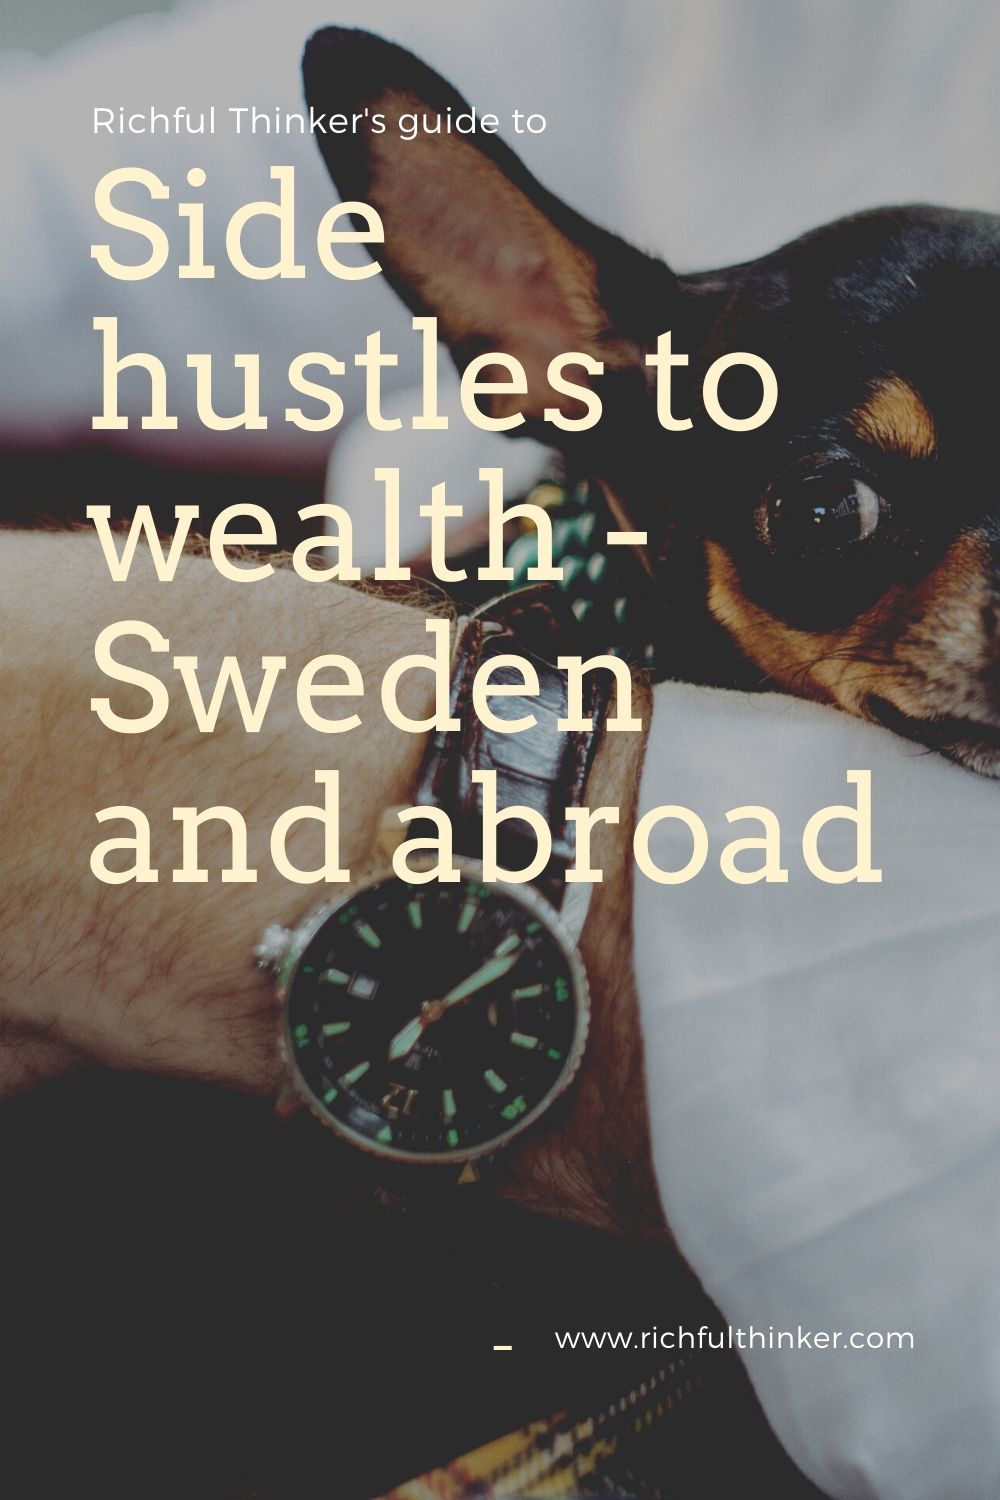 Build wealth through side-hustles - Sweden and abroad